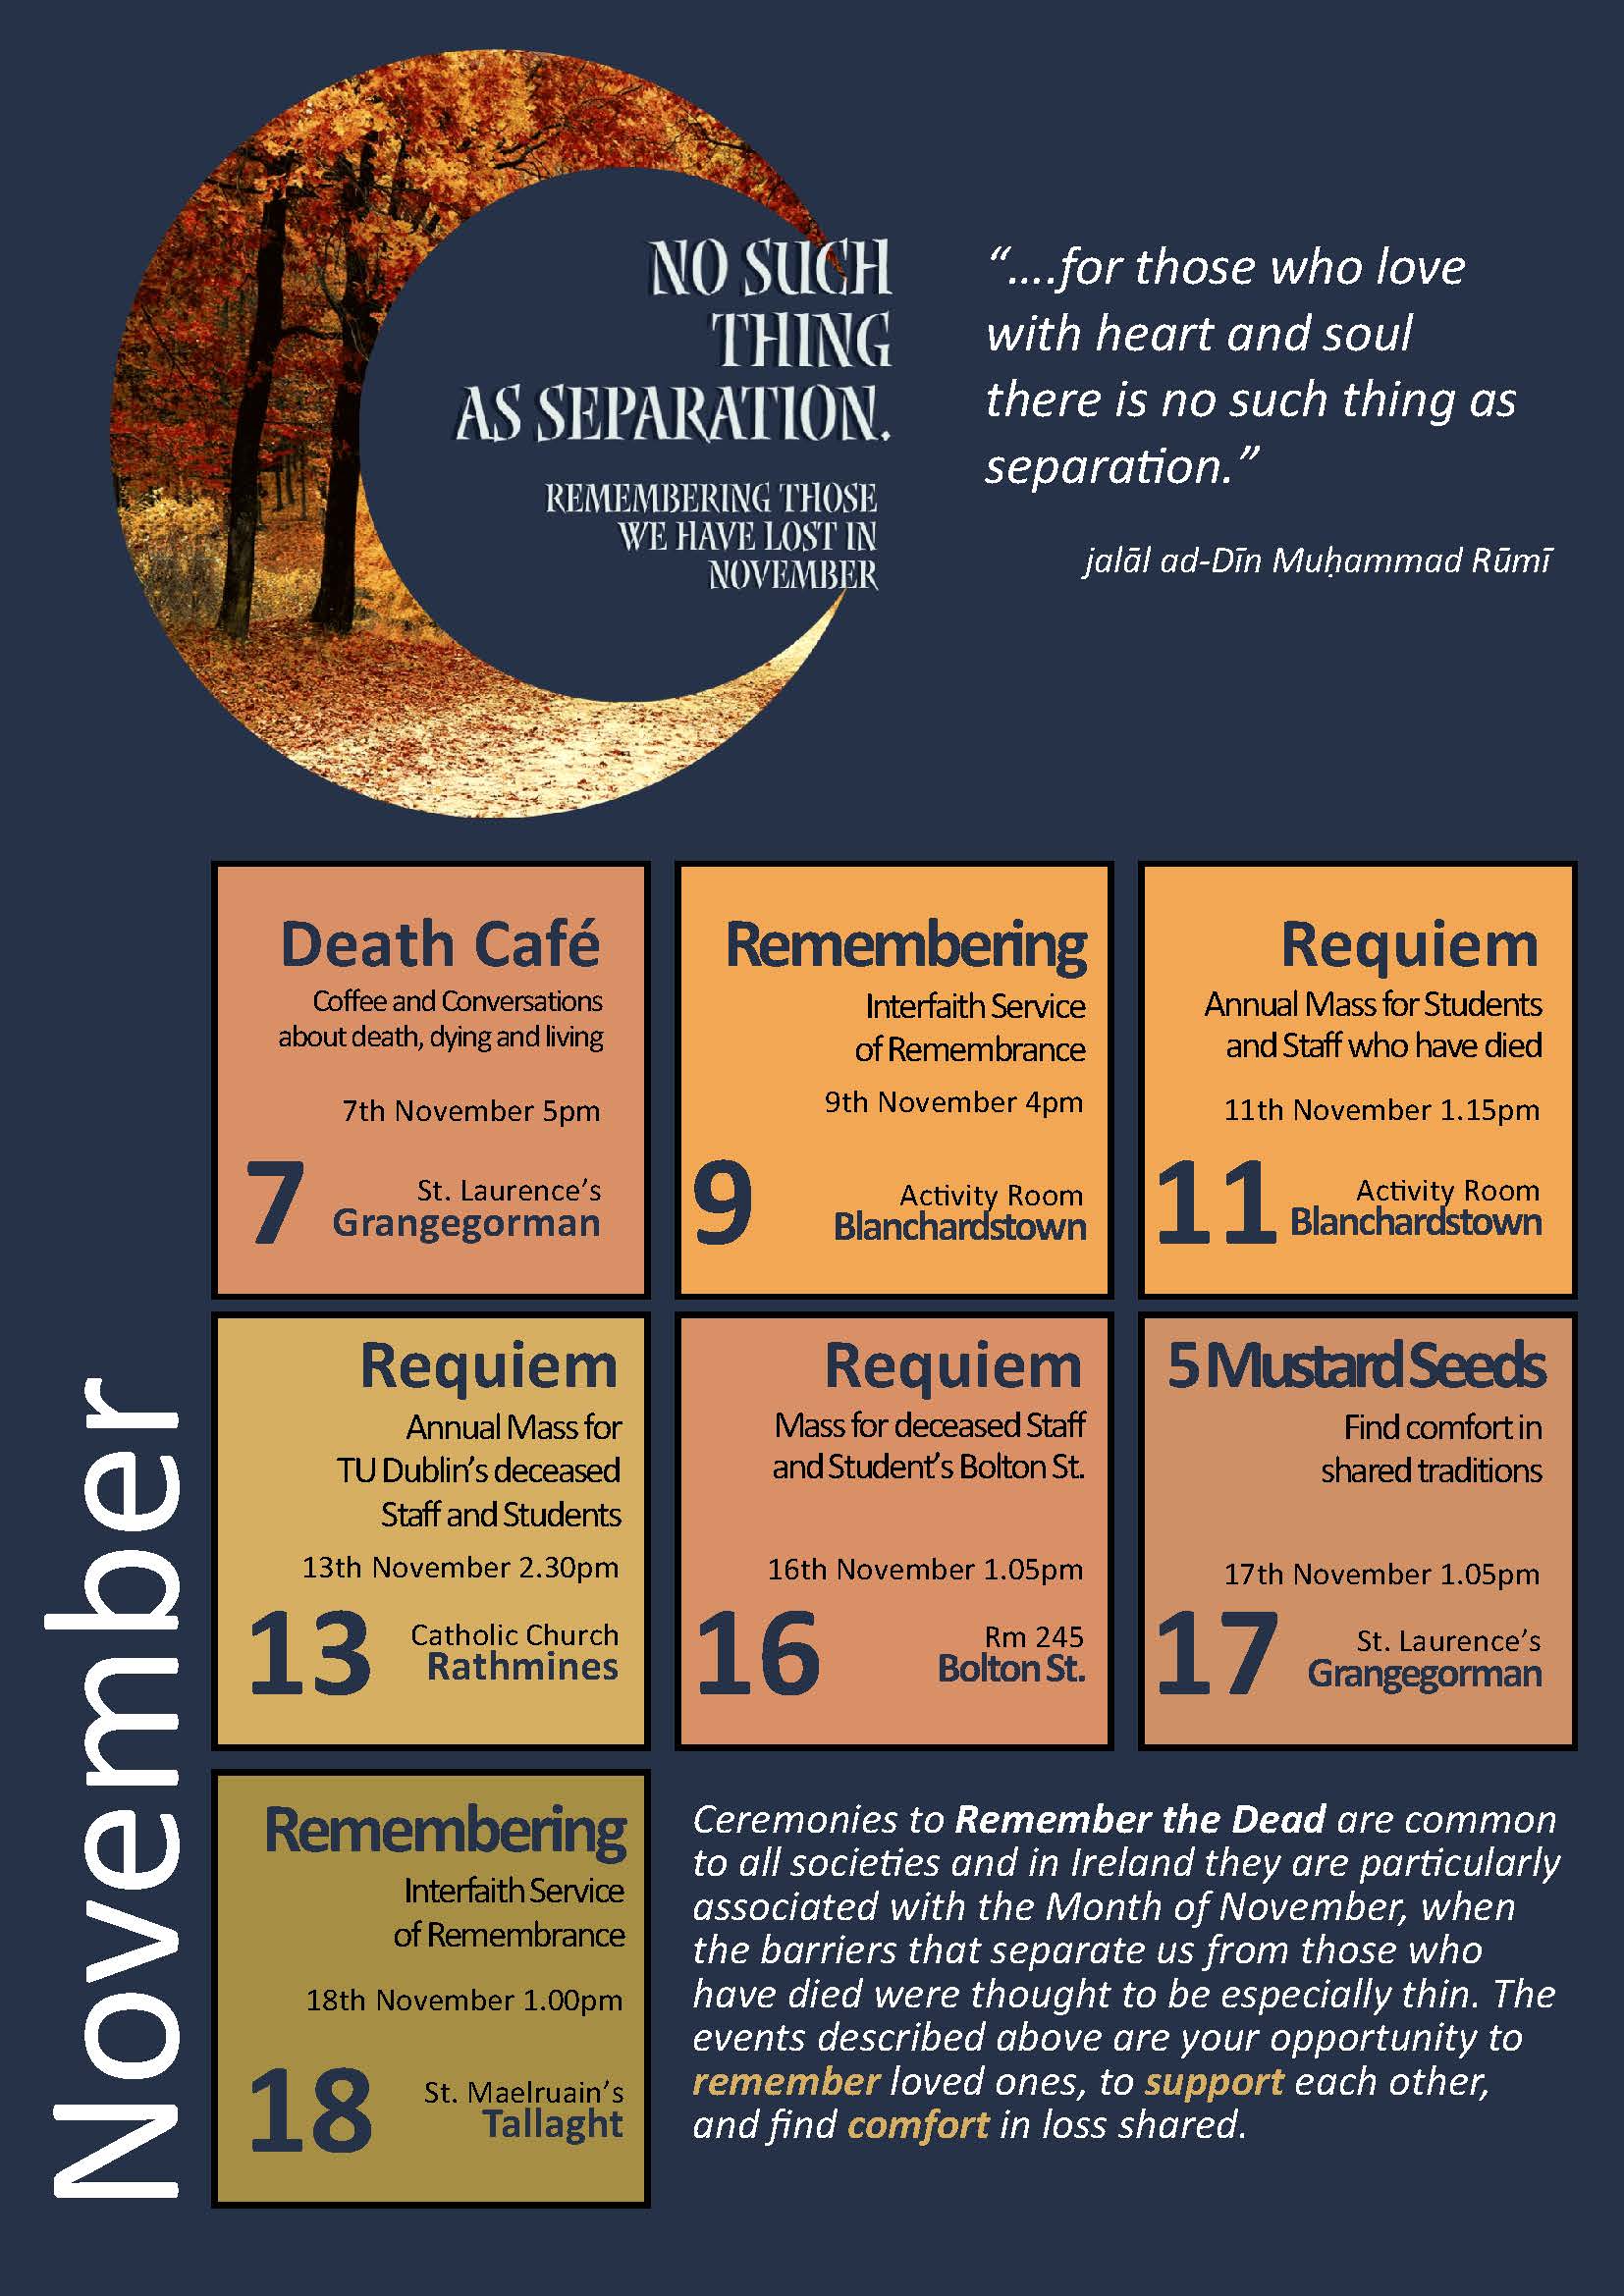 Poster showing different events to remember those who died